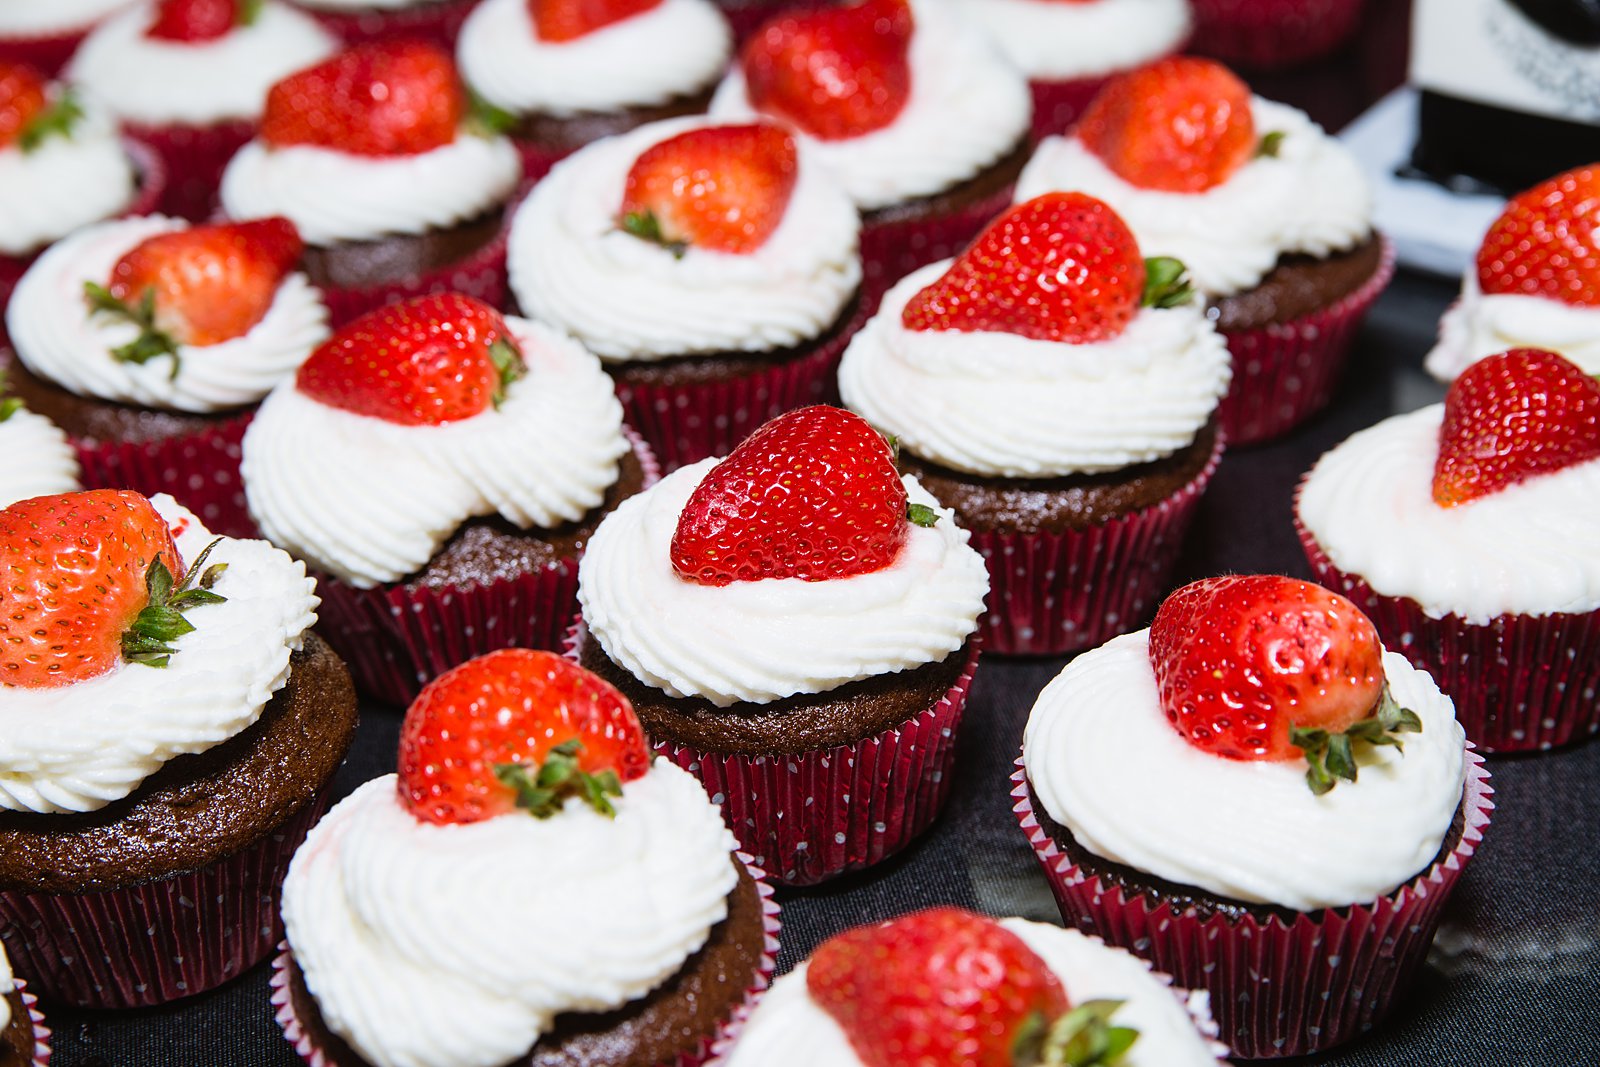 Chocolate wedding cupcakes with fresh strawberries by PMA Photography.